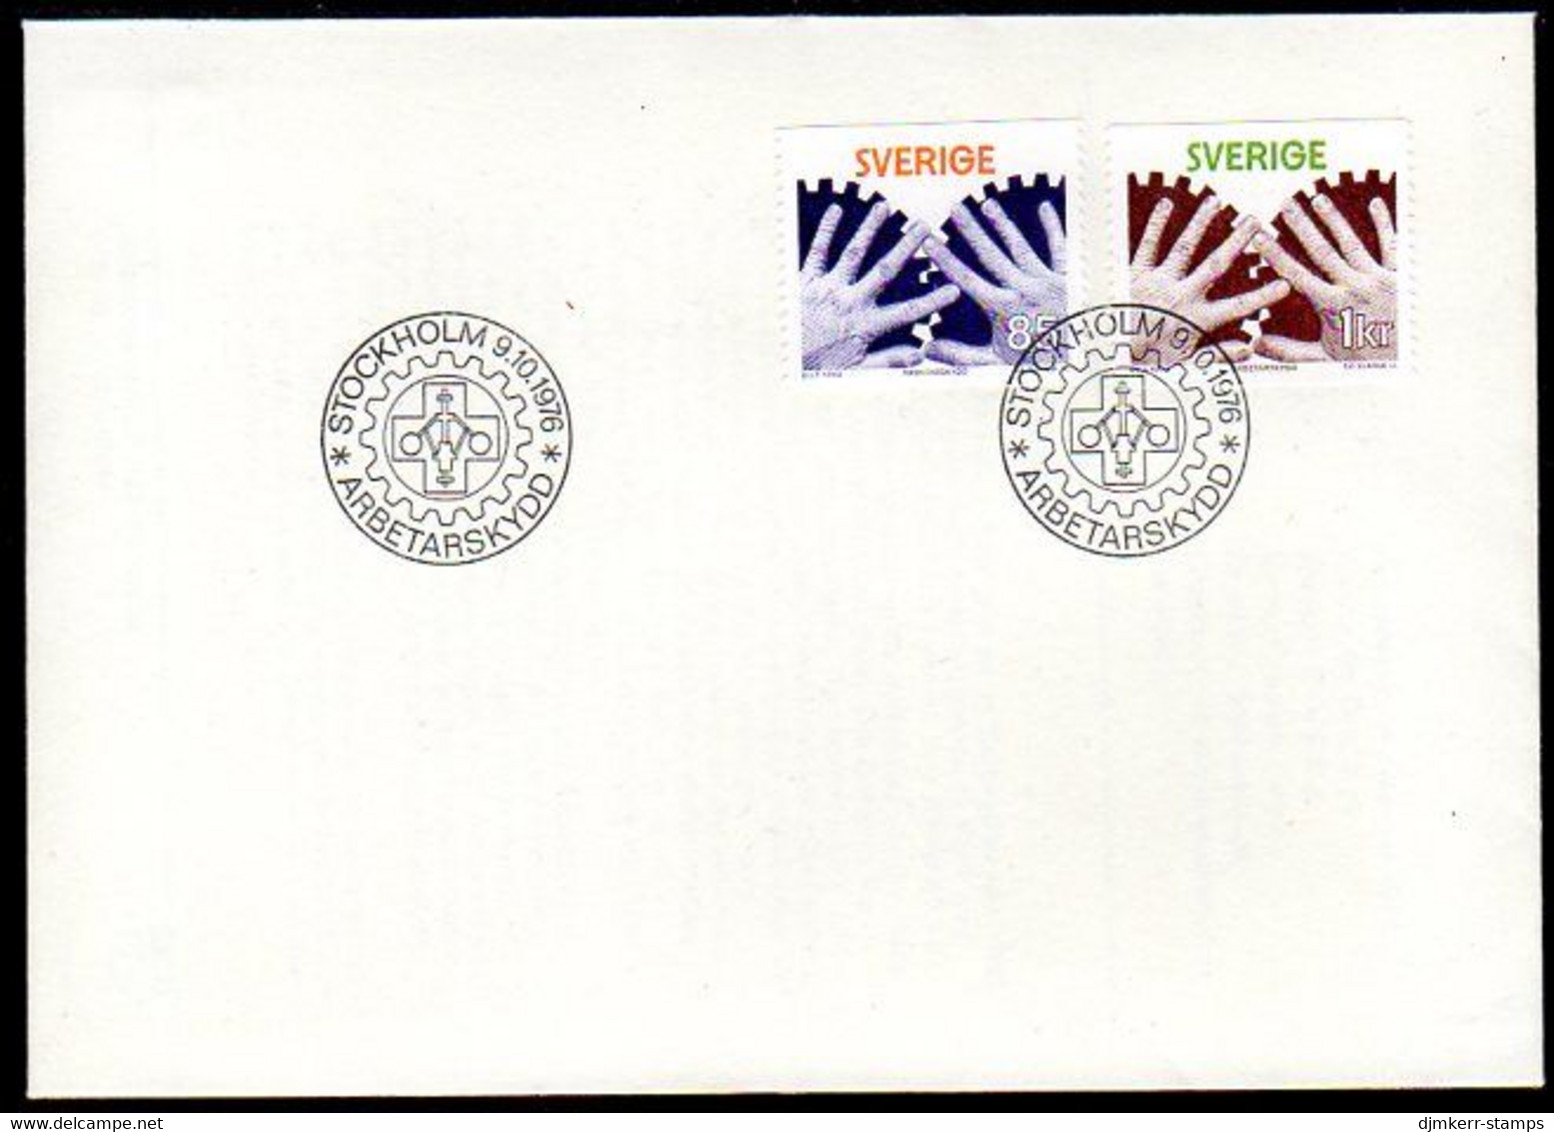 SWEDEN 1976 Workplace Safety FDC.  Michel 964-65 - FDC